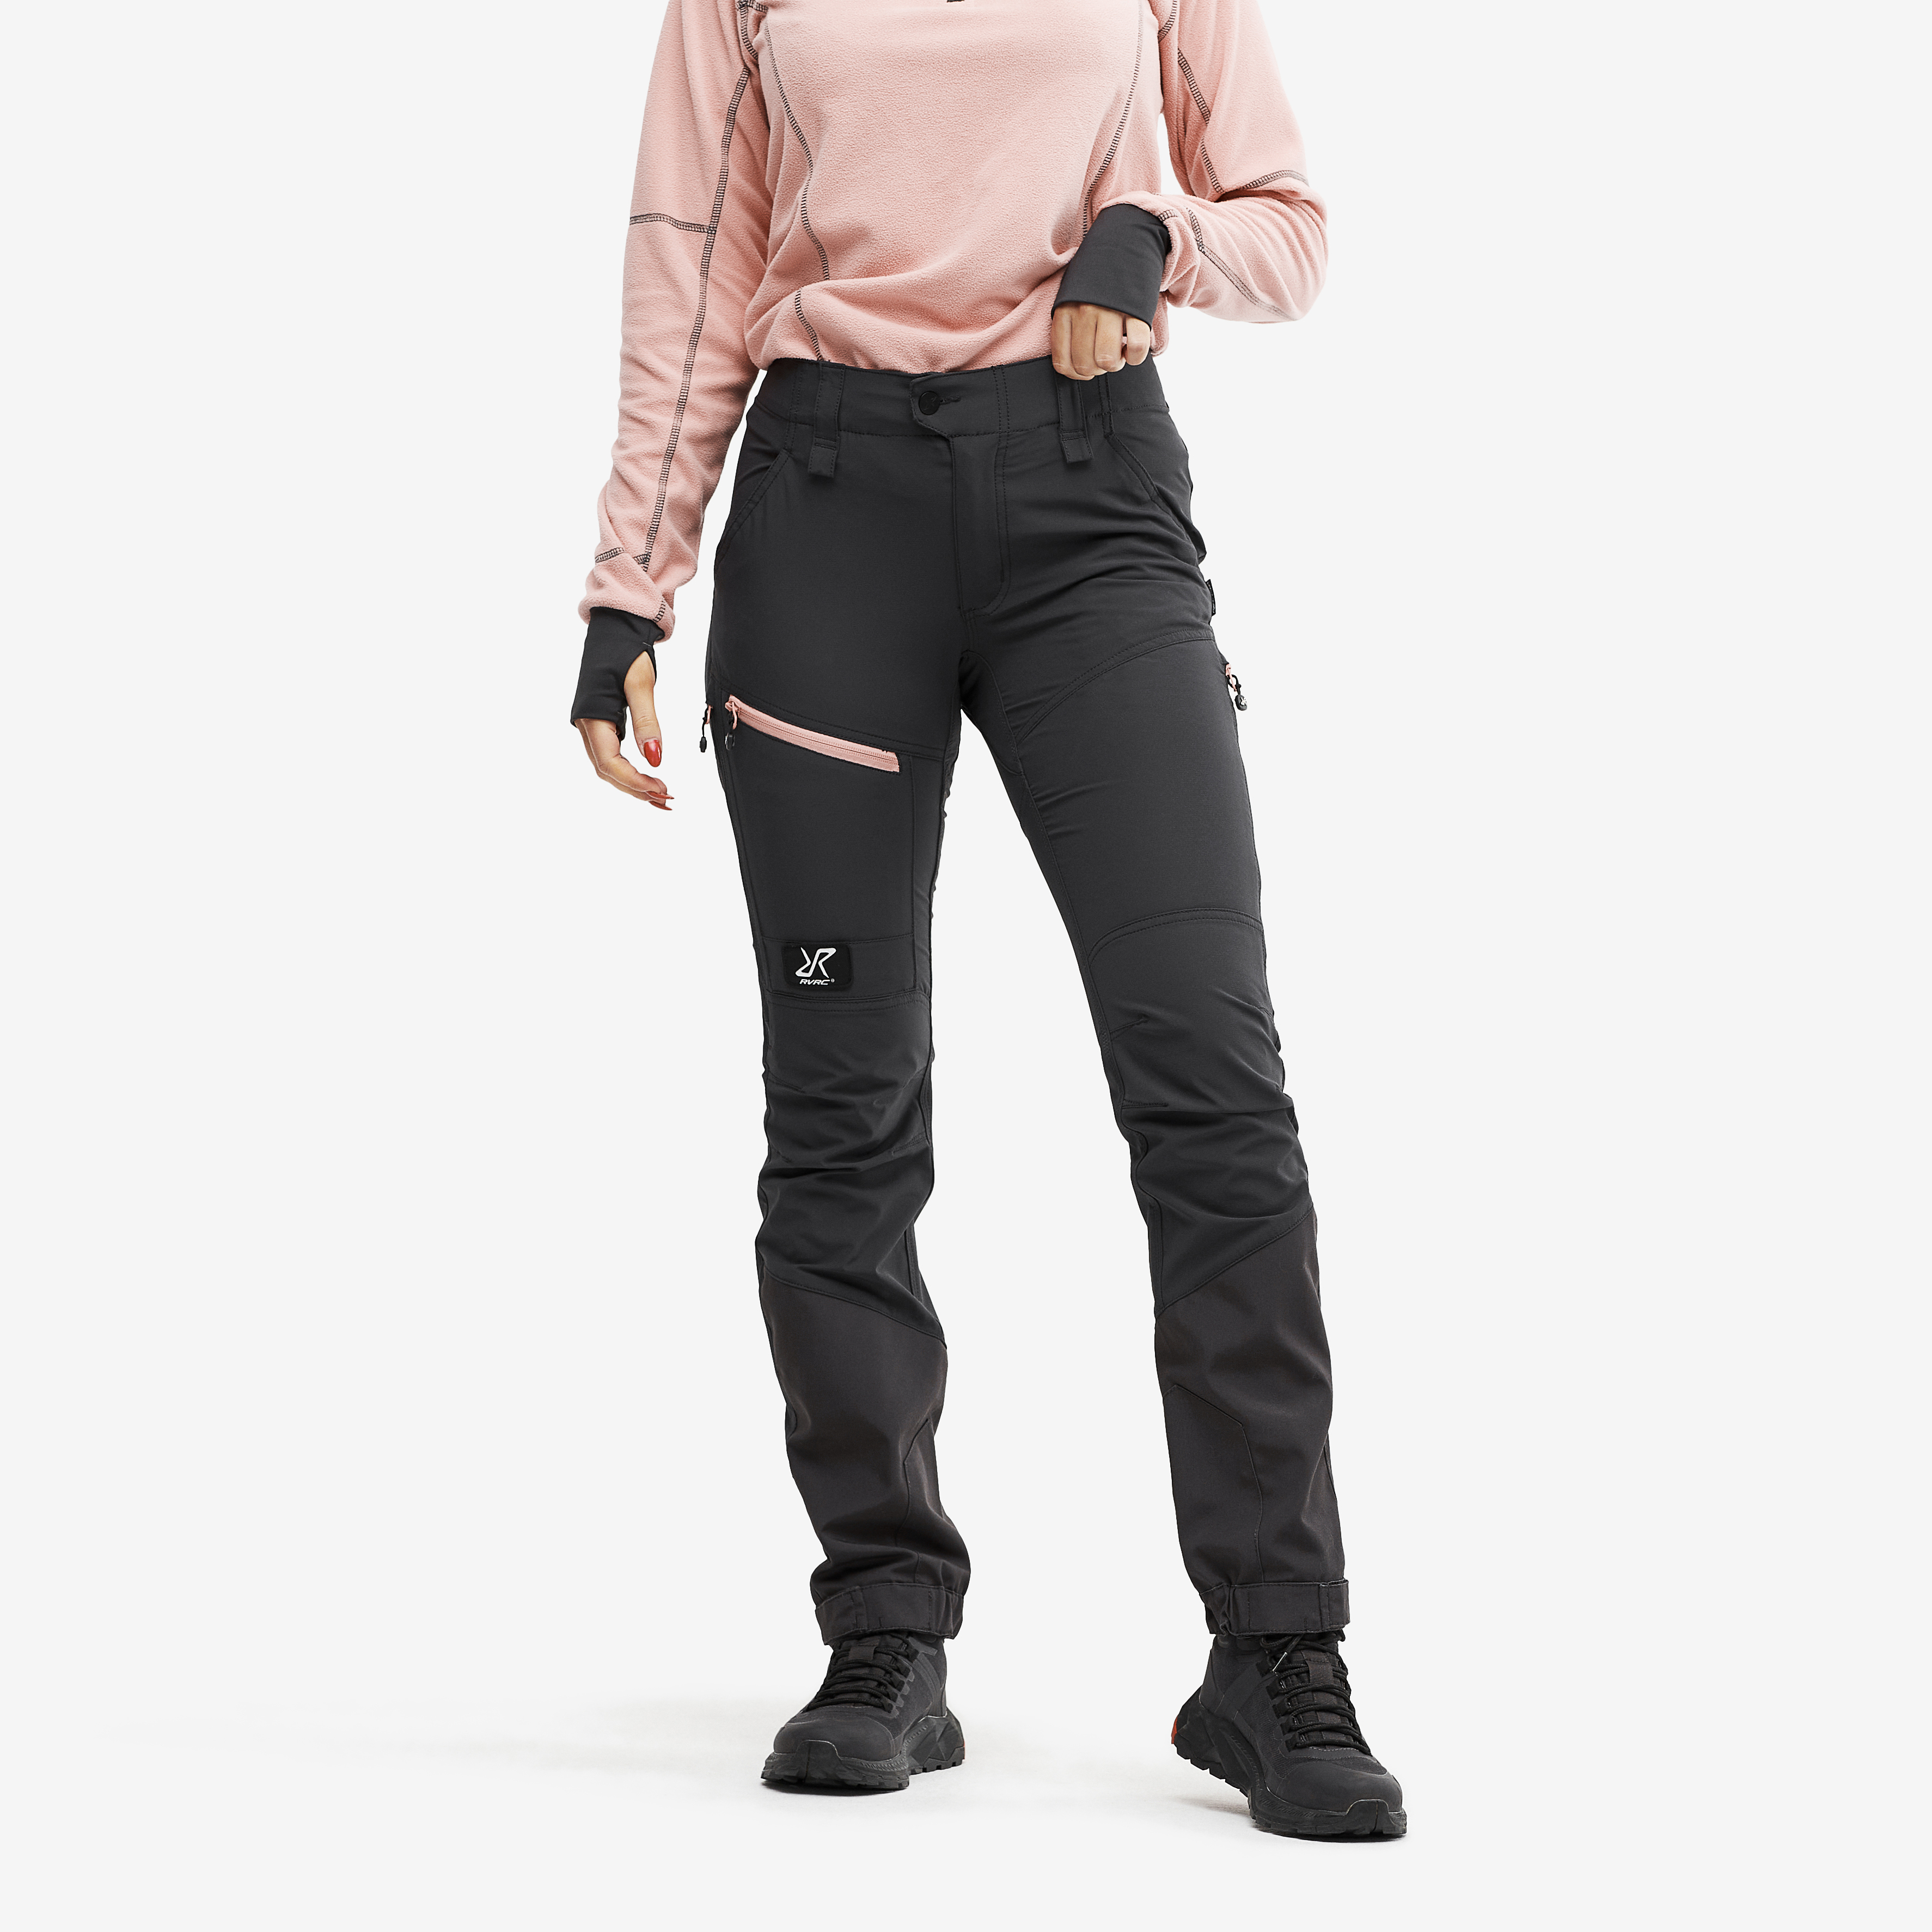 Silence Trousers Anthracite Women